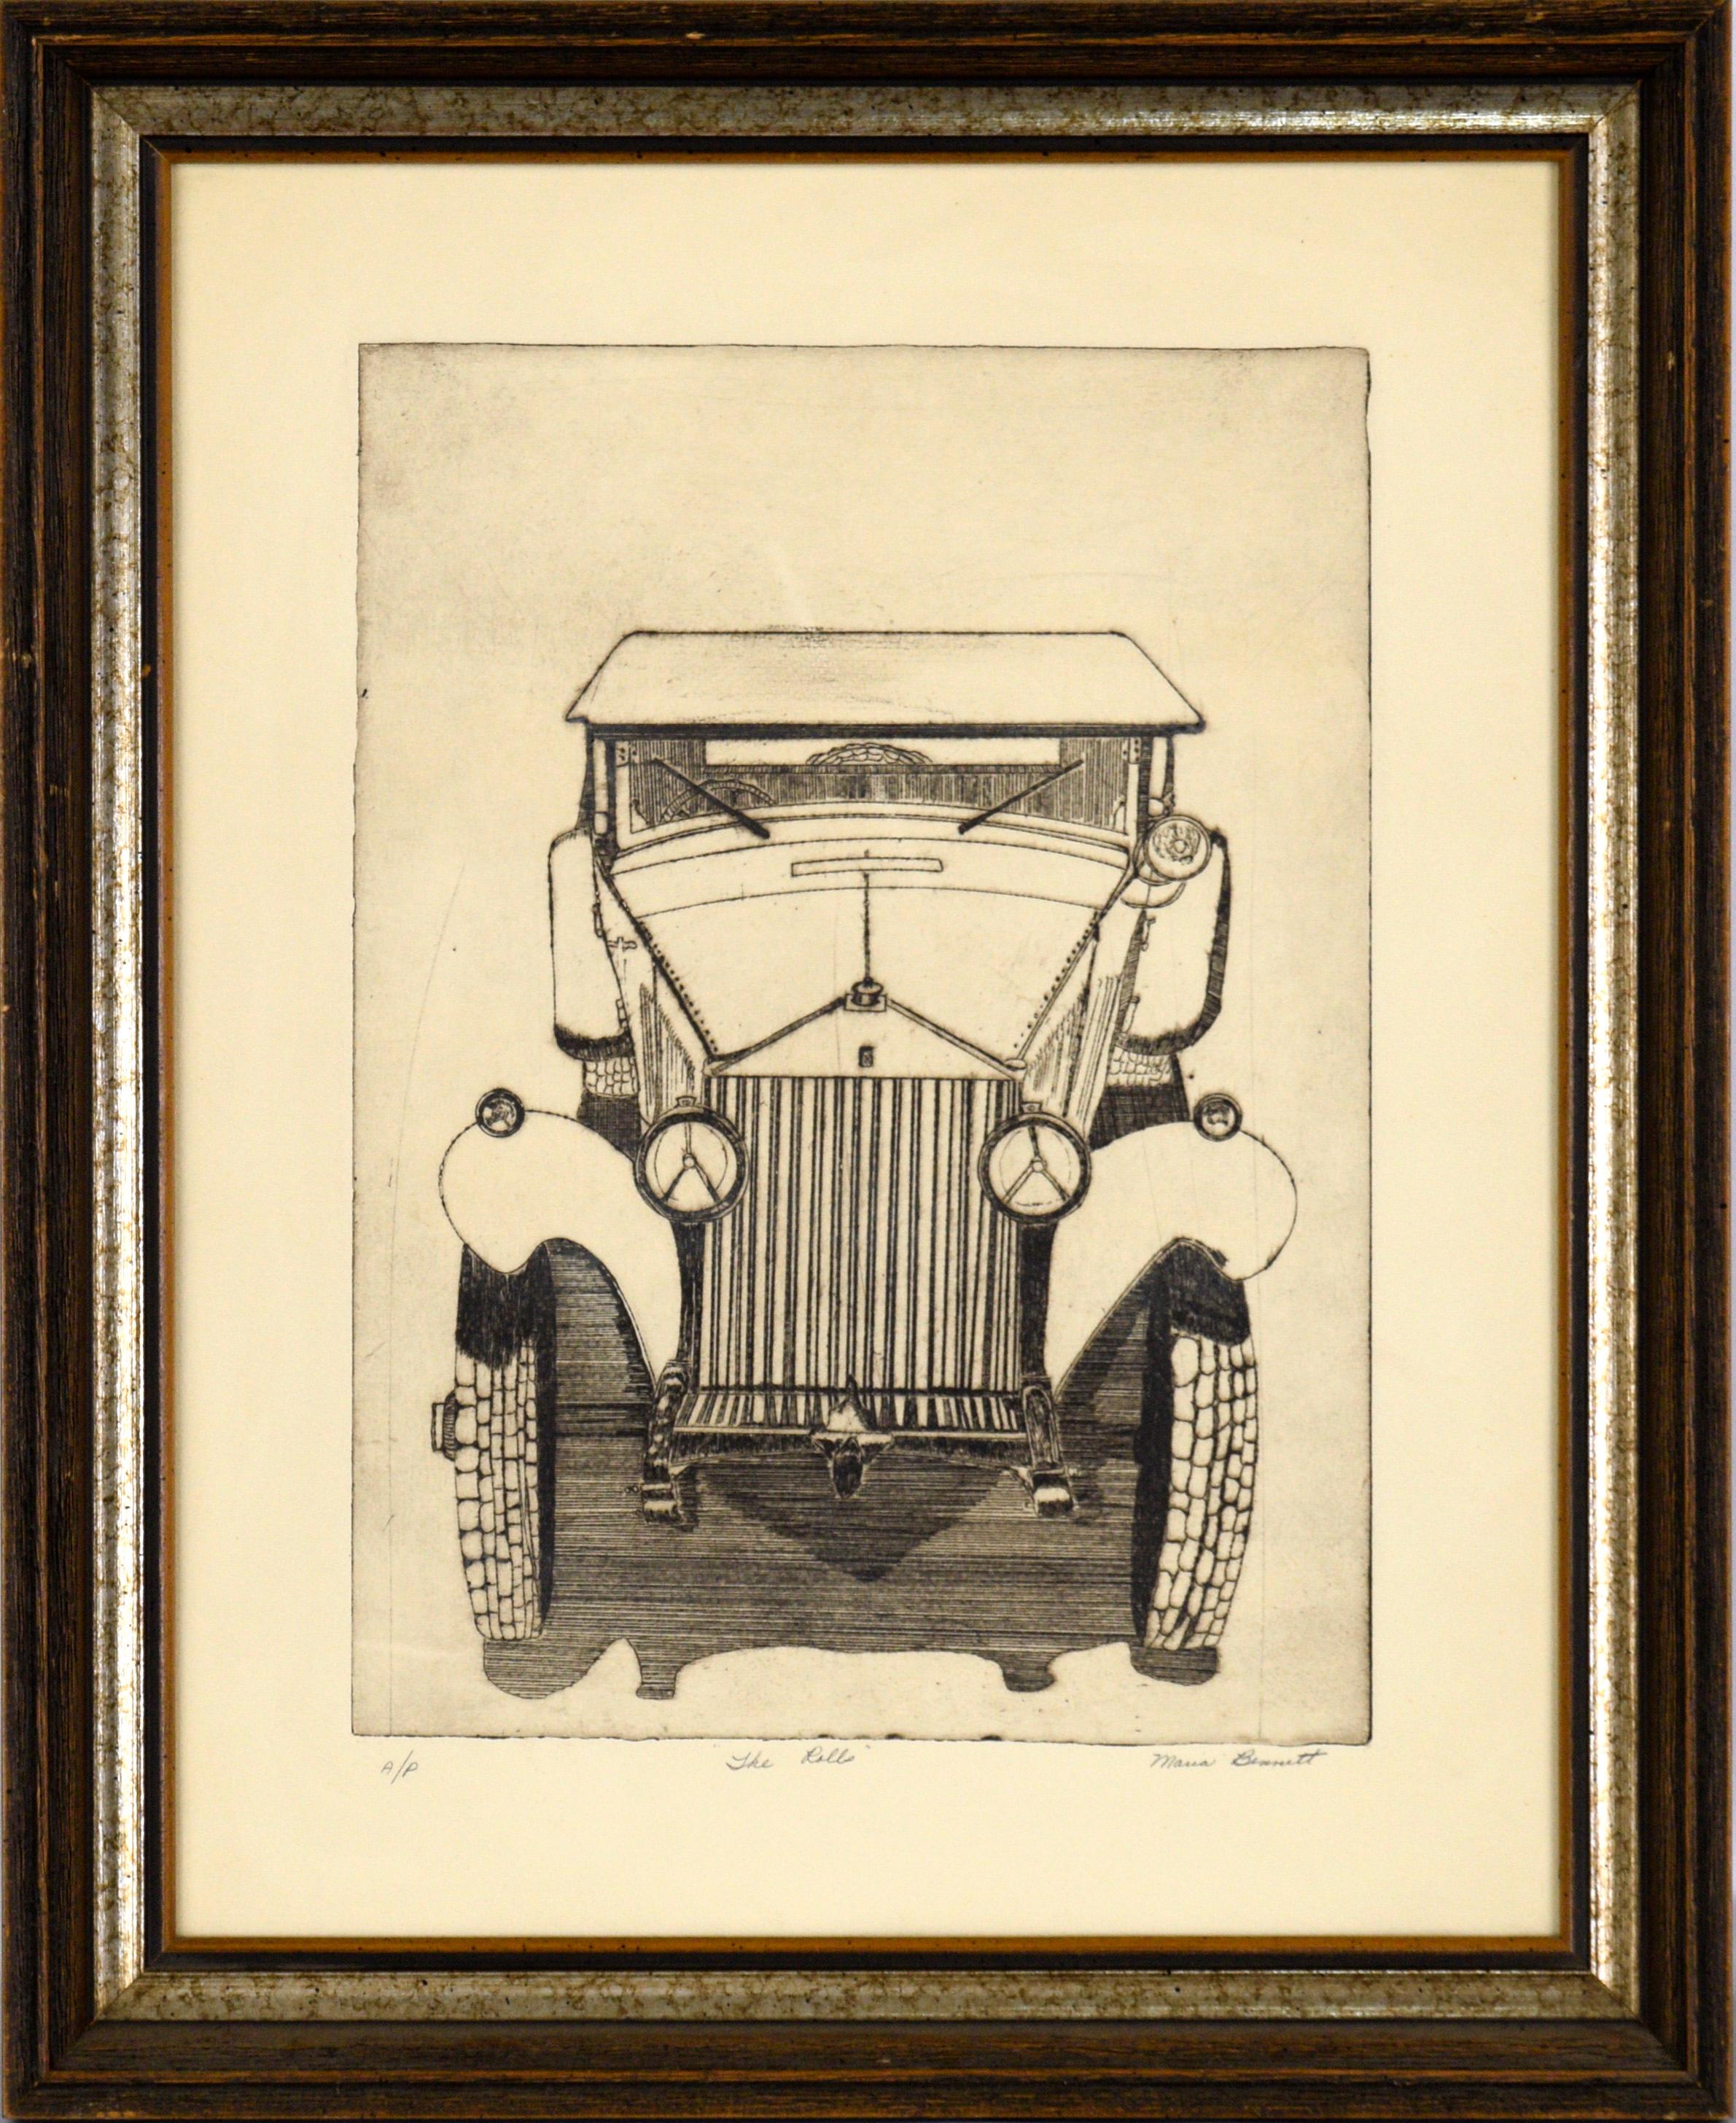 Maria Bennett Still-Life Print - "The Rolls" - Vintage Rolls Royce Automobile Etching on Paper (A/P)